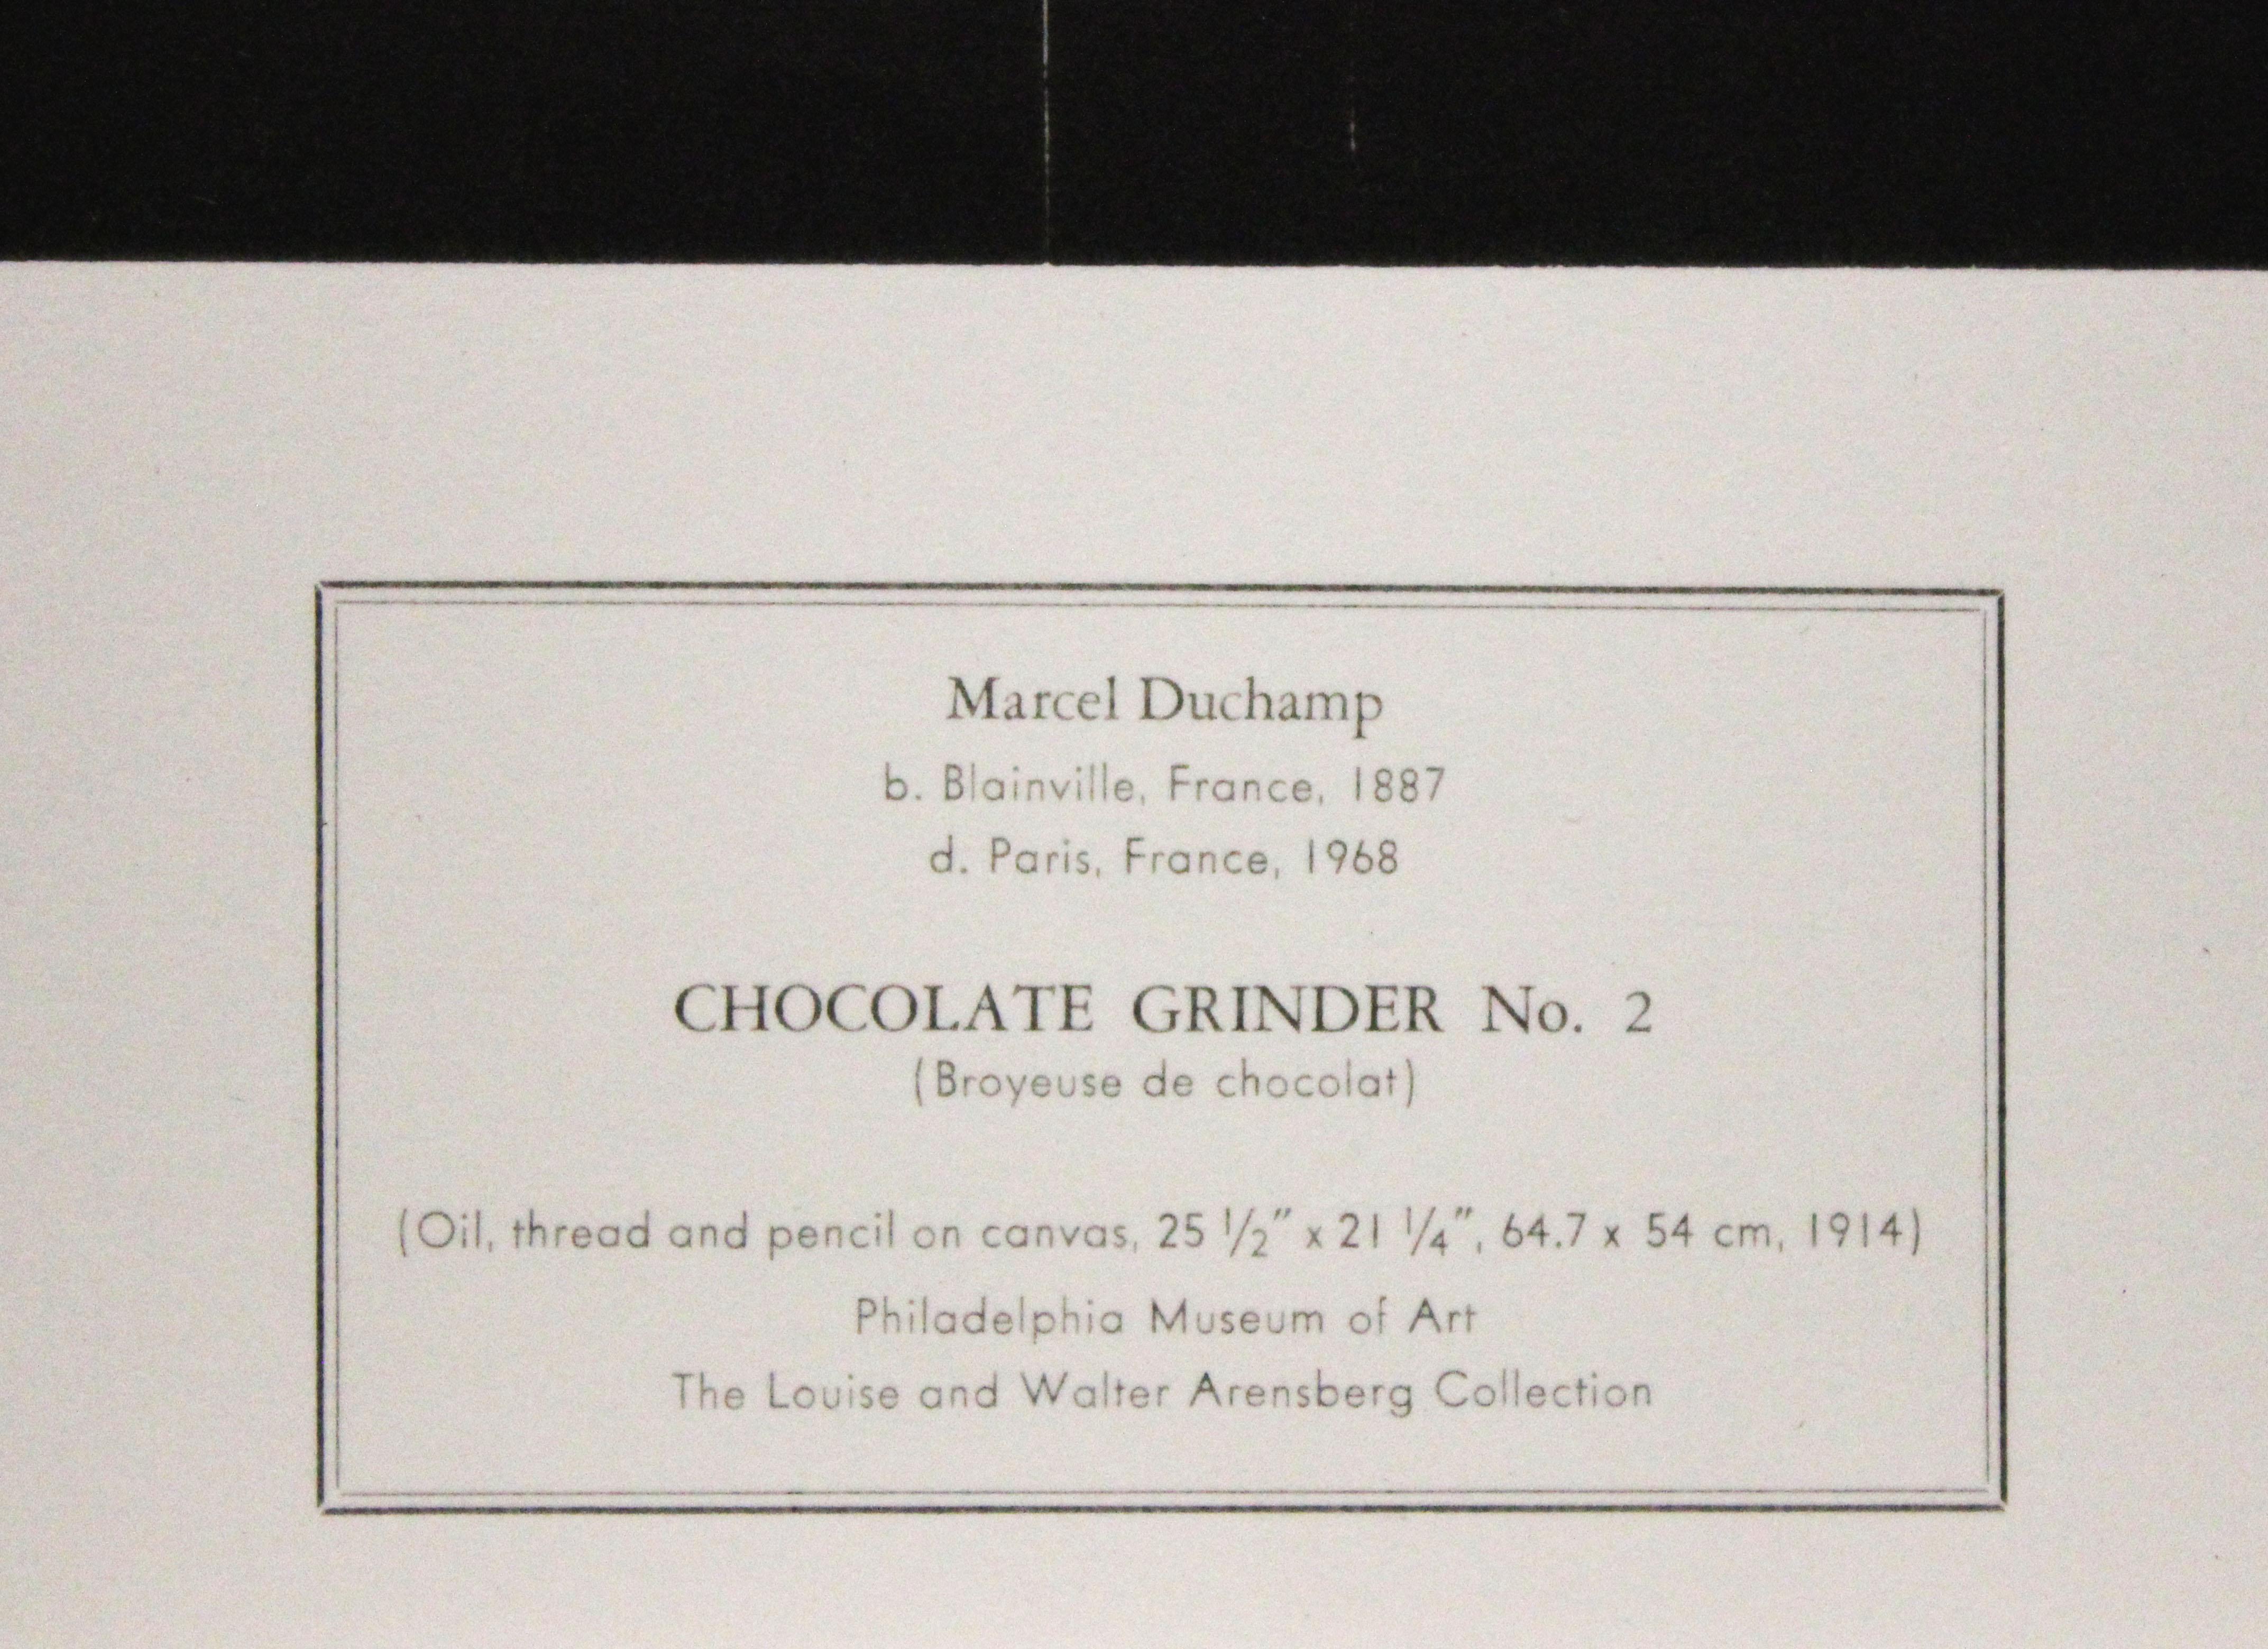 Chocolate Grinder No. 2-Poster, 1972 New York Graphic Society - Print by (after) Marcel Duchamp